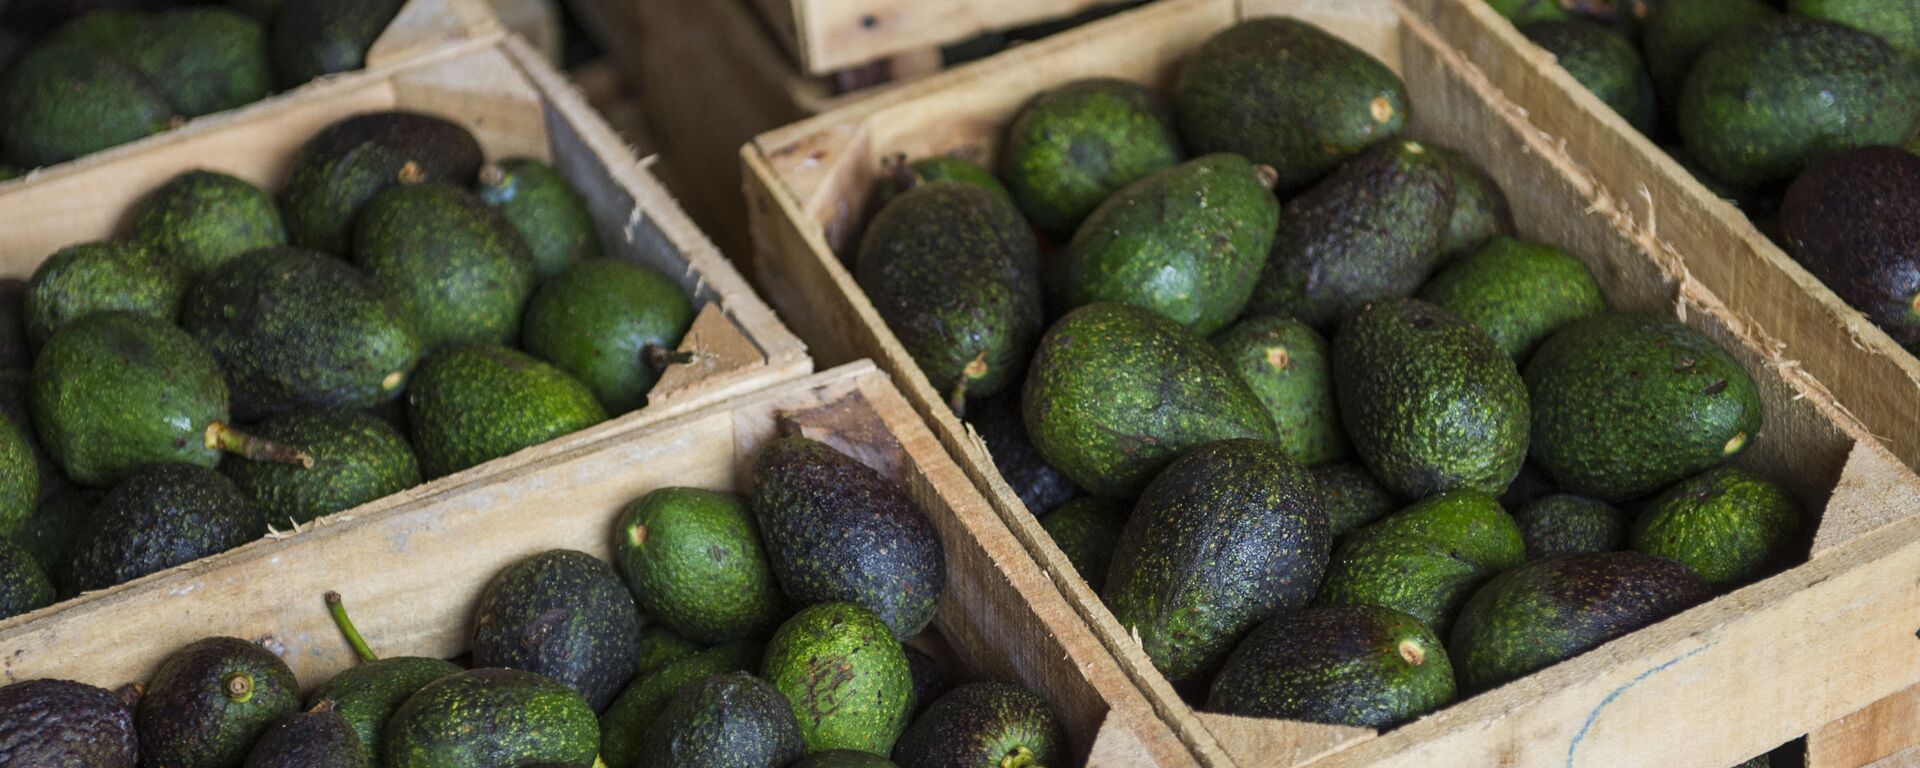 Crates of avocados from Michoacan available for sale at a market in Mexico City, Tuesday, Aug. 9, 2016. High avocado prices have fueled deforestation in Michoacan, where farmers cut down pines to clear the way for more avocado trees - Sputnik International, 1920, 15.02.2022